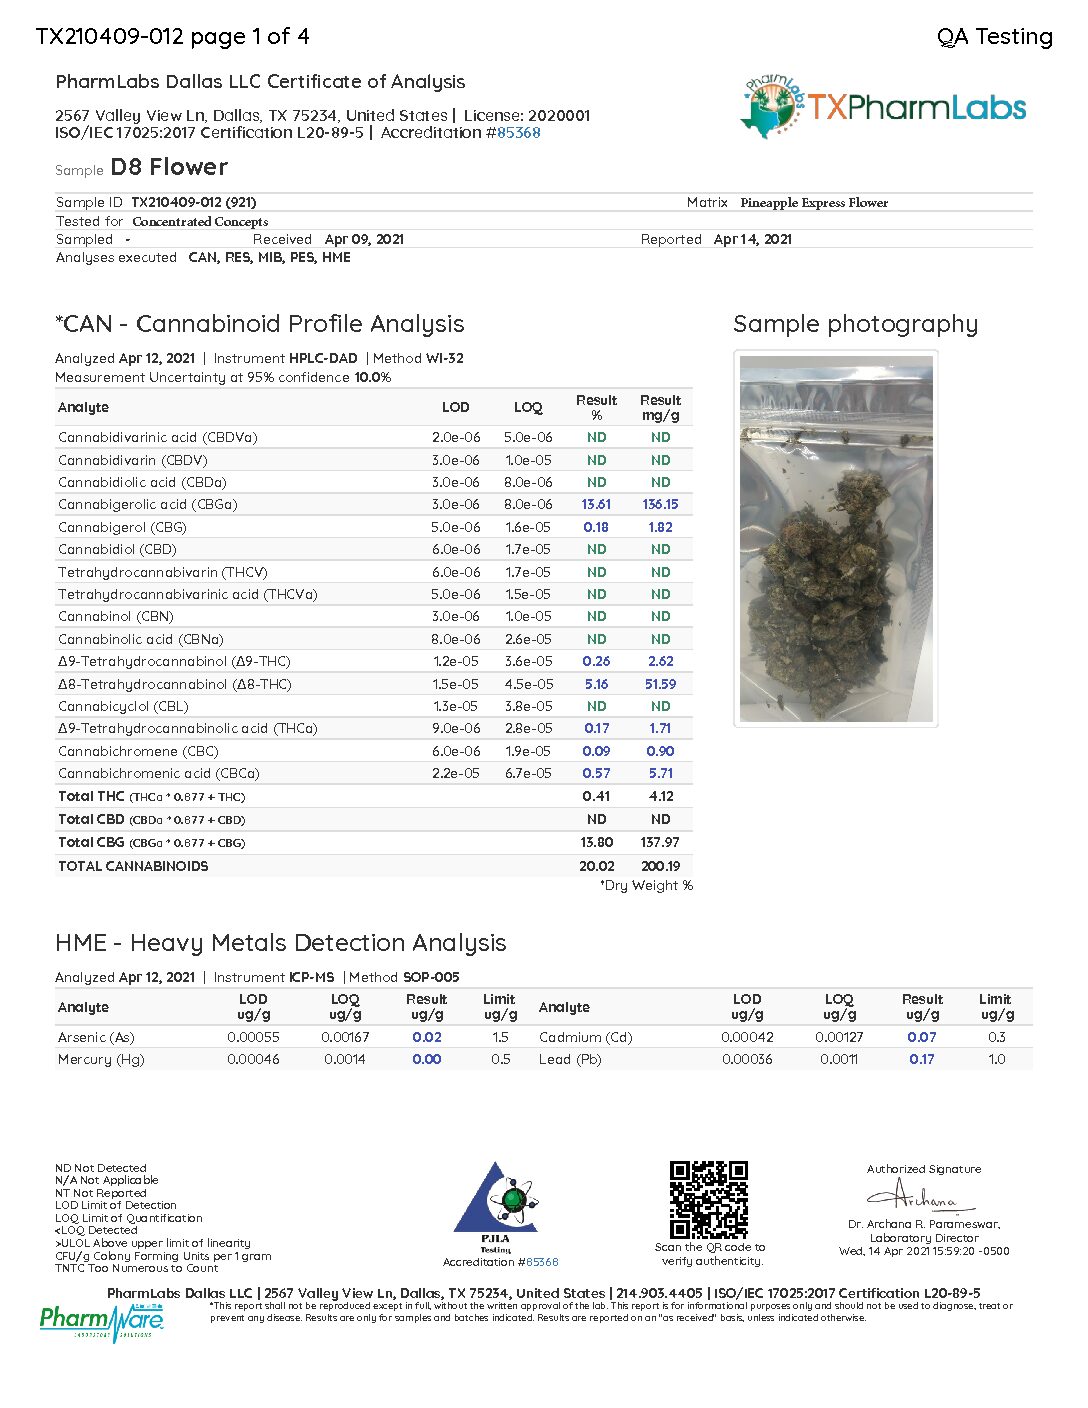 Concentrated Concepts Pineapple Express Premium Delta 8 Flower COA Report